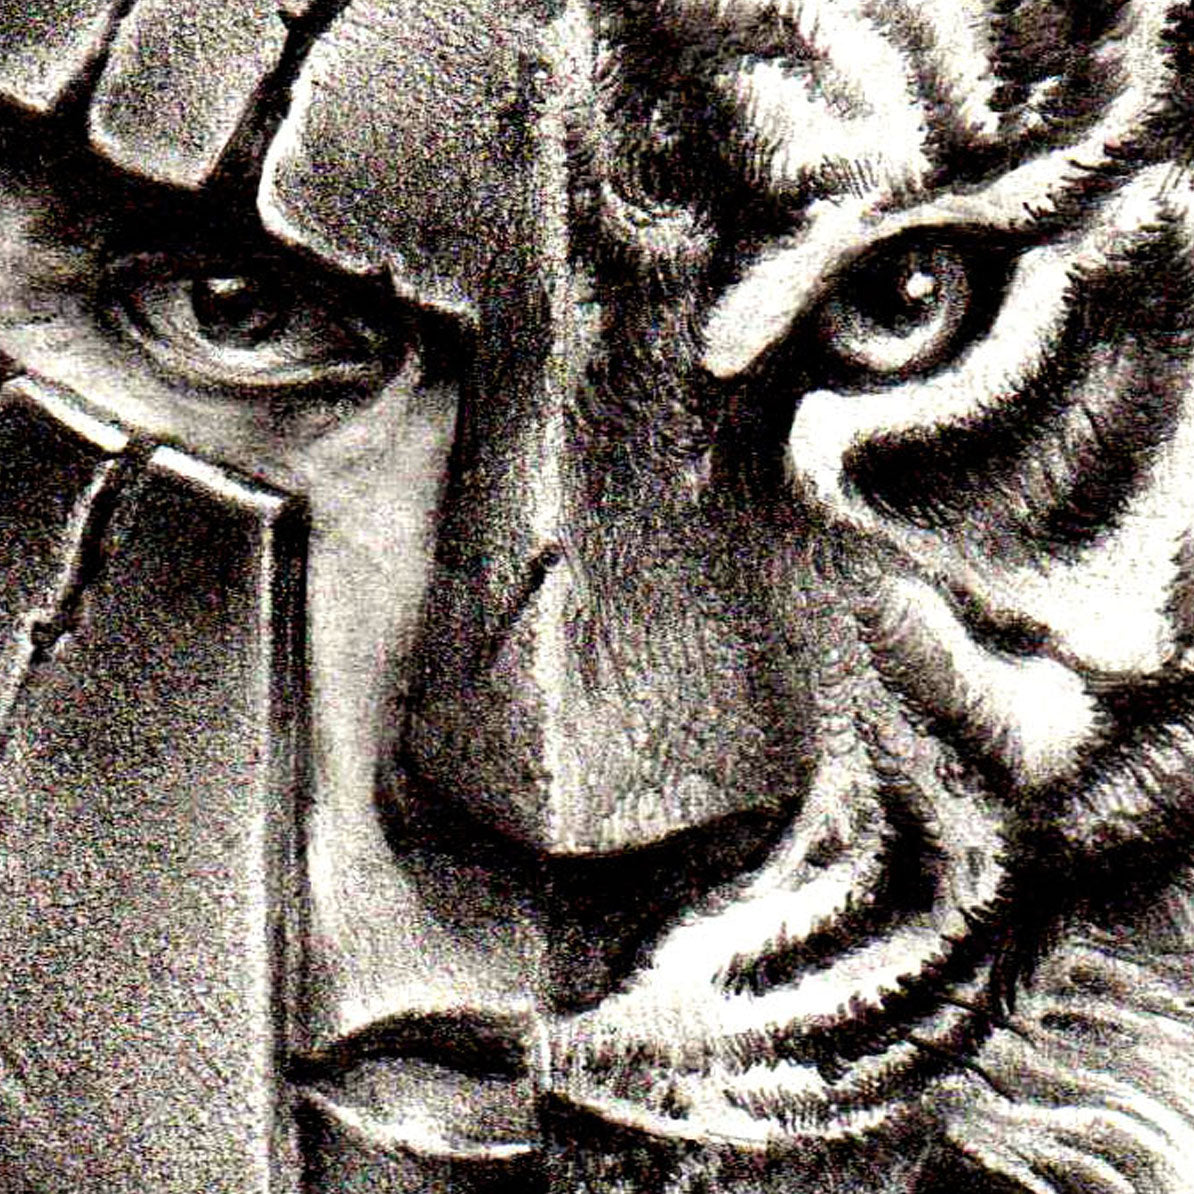 Tiger and spartan realistic tattoo design references – TattooDesignStock